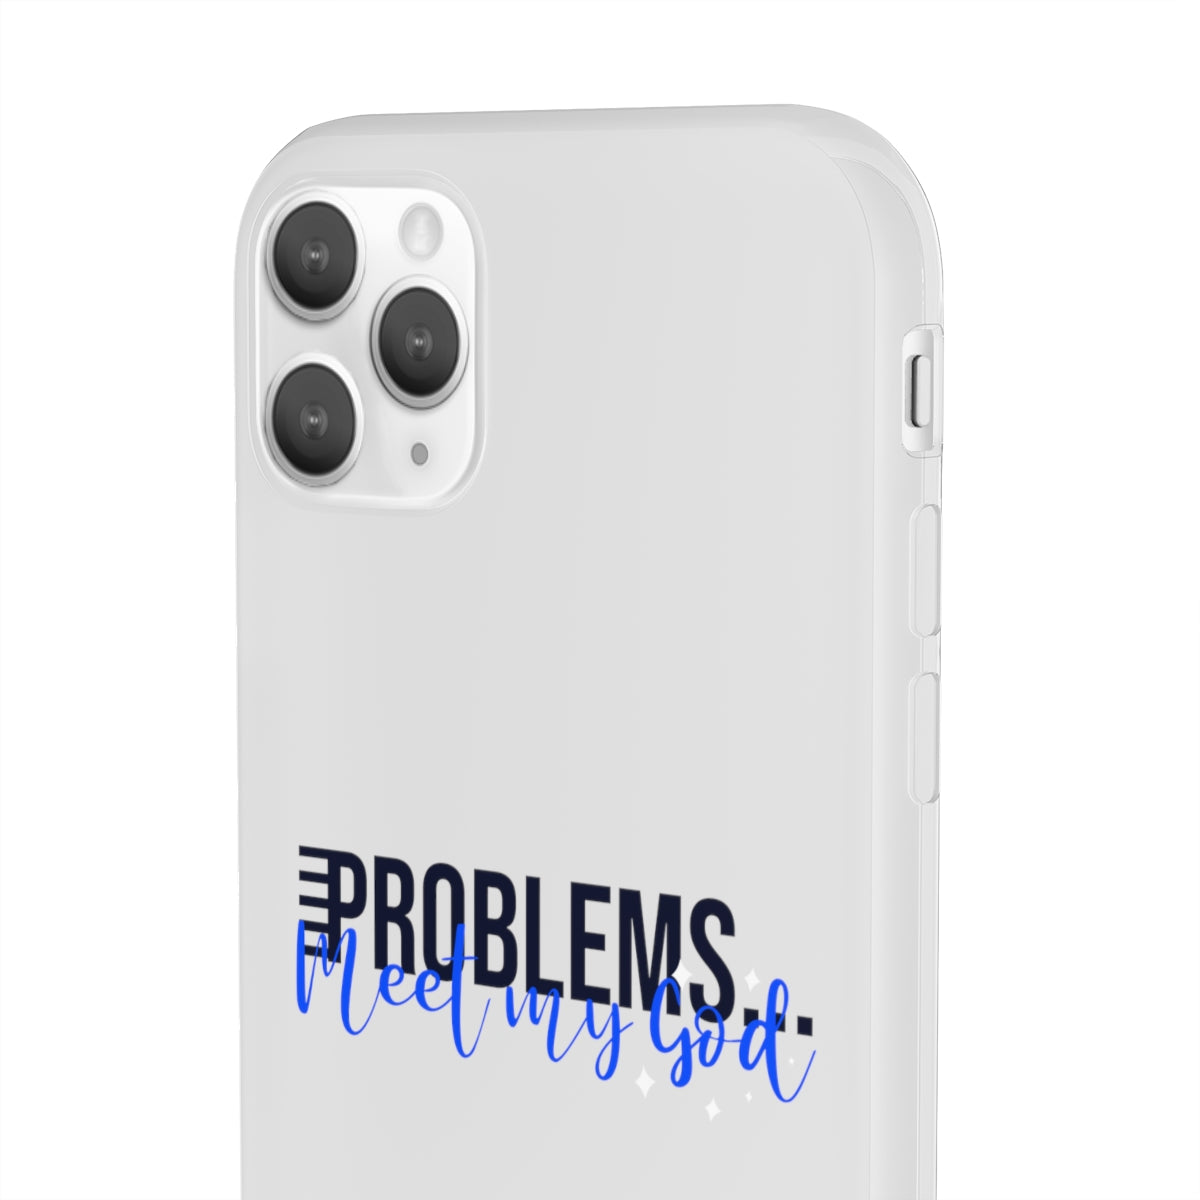 Problems Meet My  God Flexi Phone Case compatible with select IPhone & Samsung Galaxy Phones Printify